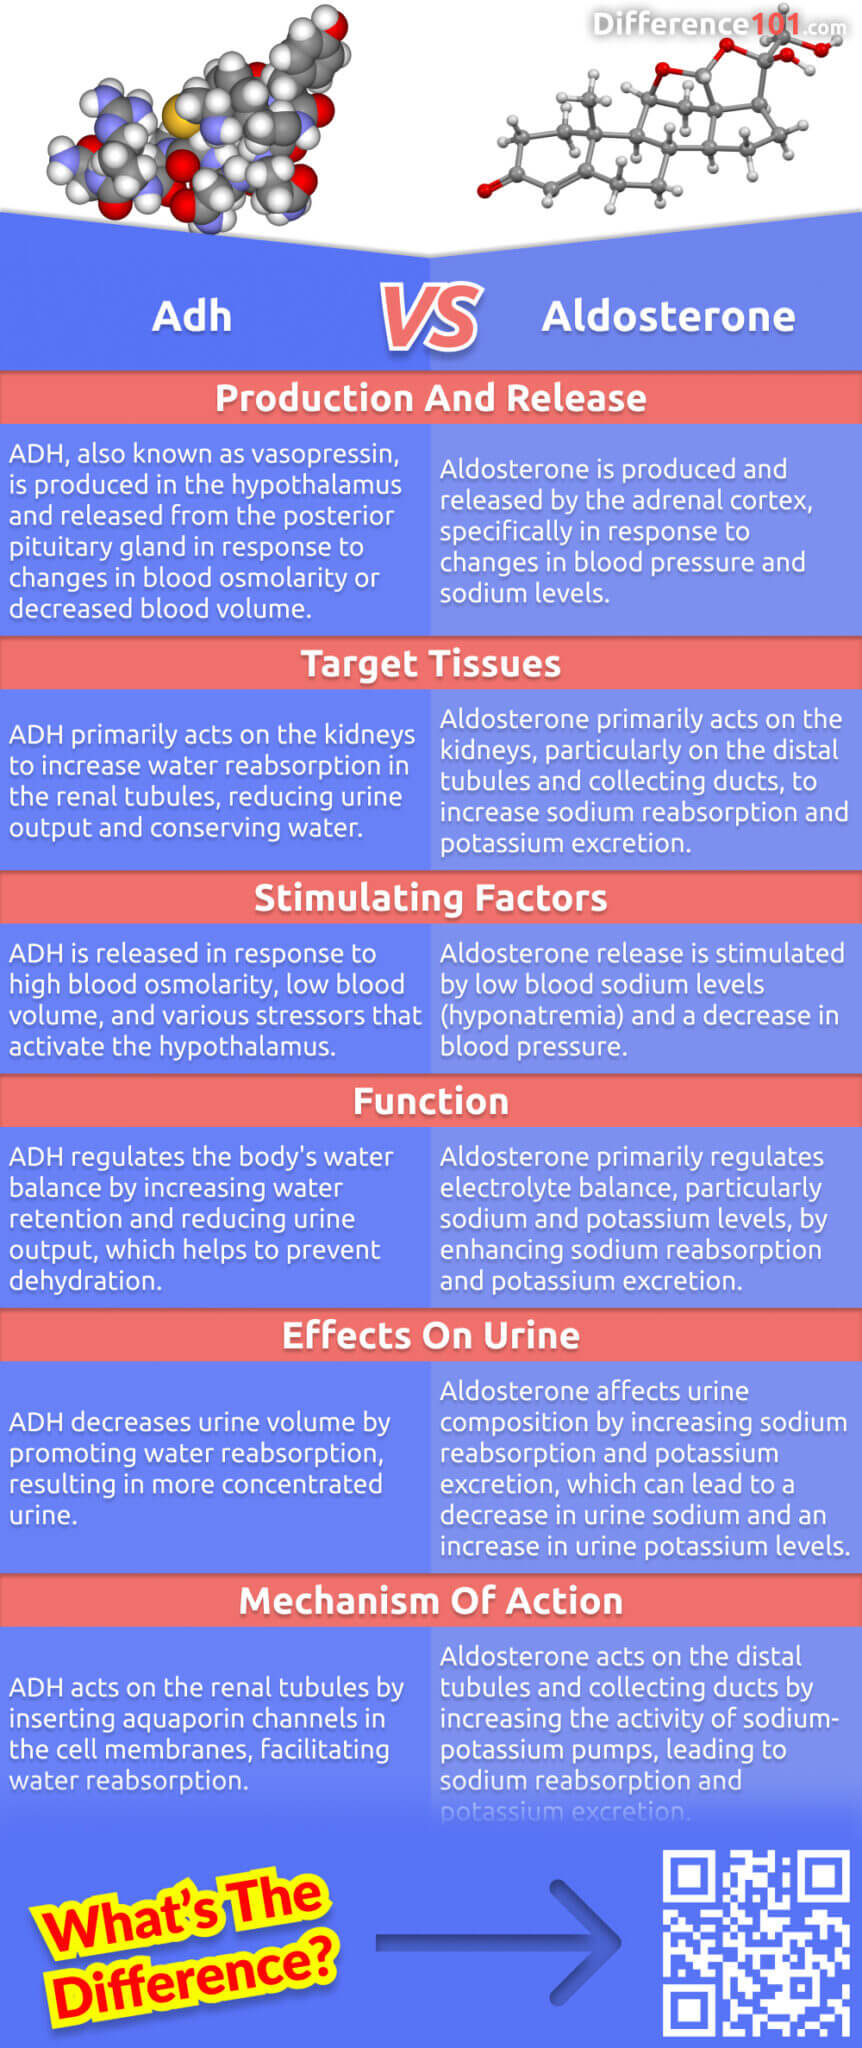 Dive into endocrinology: understanding the difference between Adh and Aldosterone. Adh regulates water balance, while Aldosterone manages sodium levels. Explore their roles in maintaining bodily equilibrium.